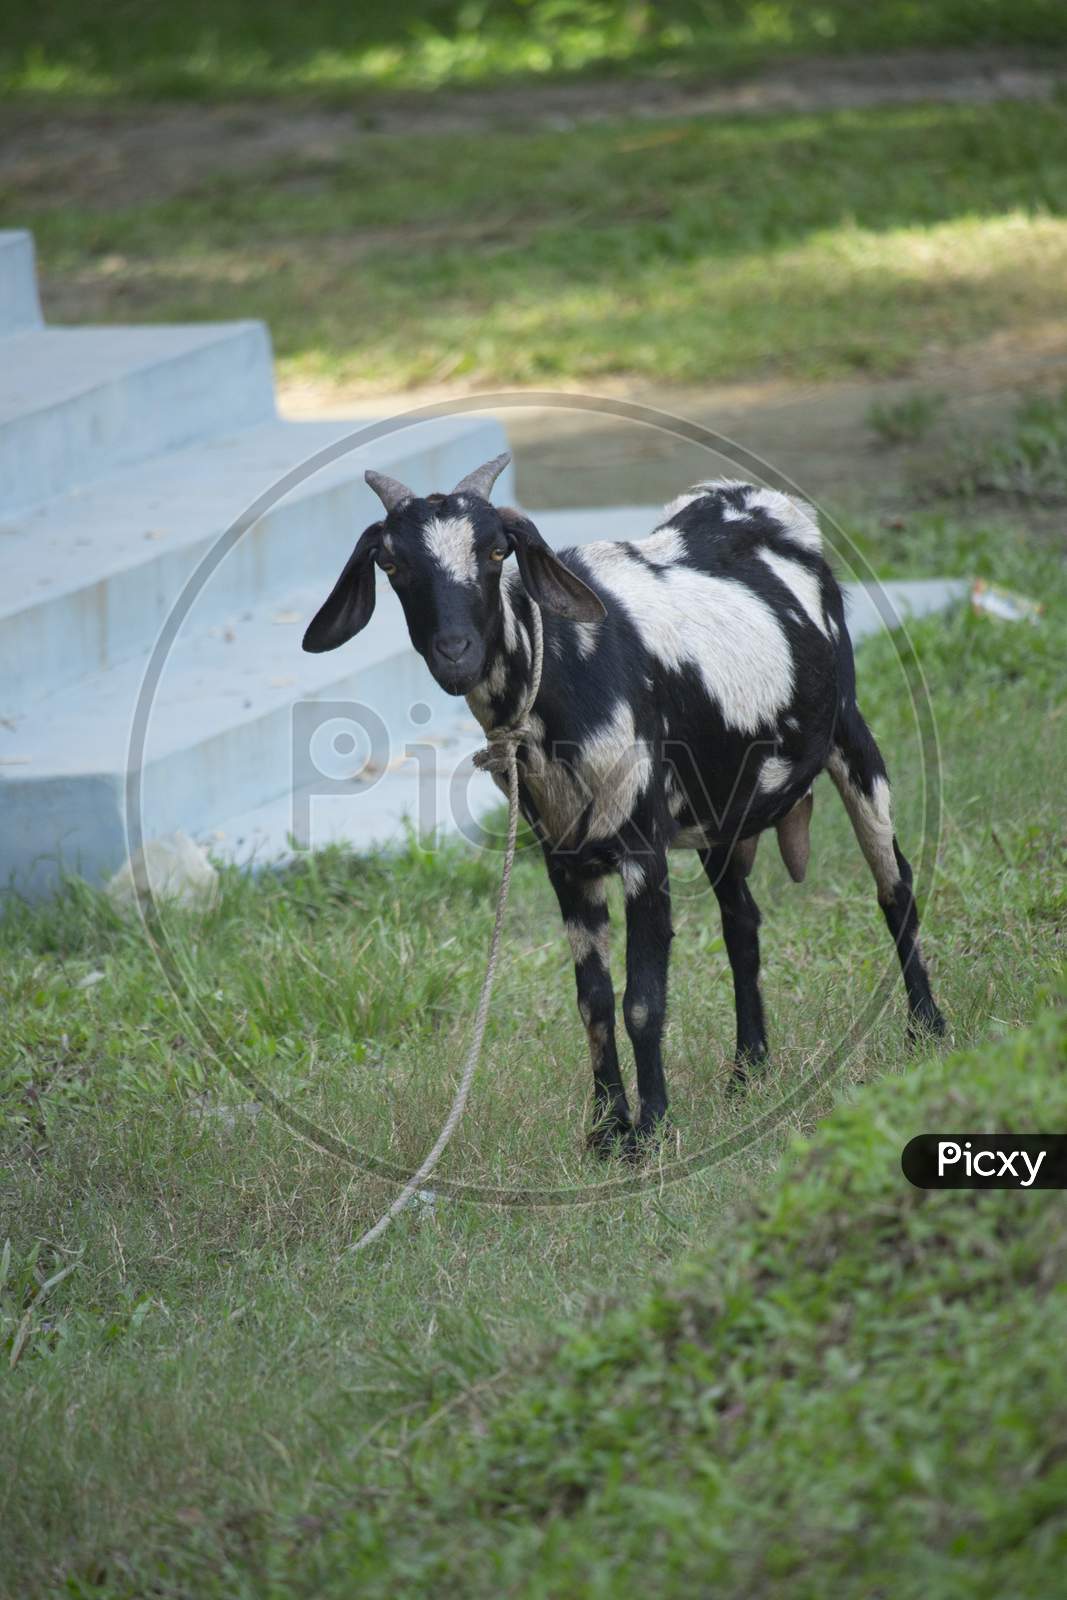 A Goat With A Black-And-White Mixture Is Standing In The Middle Of The Field